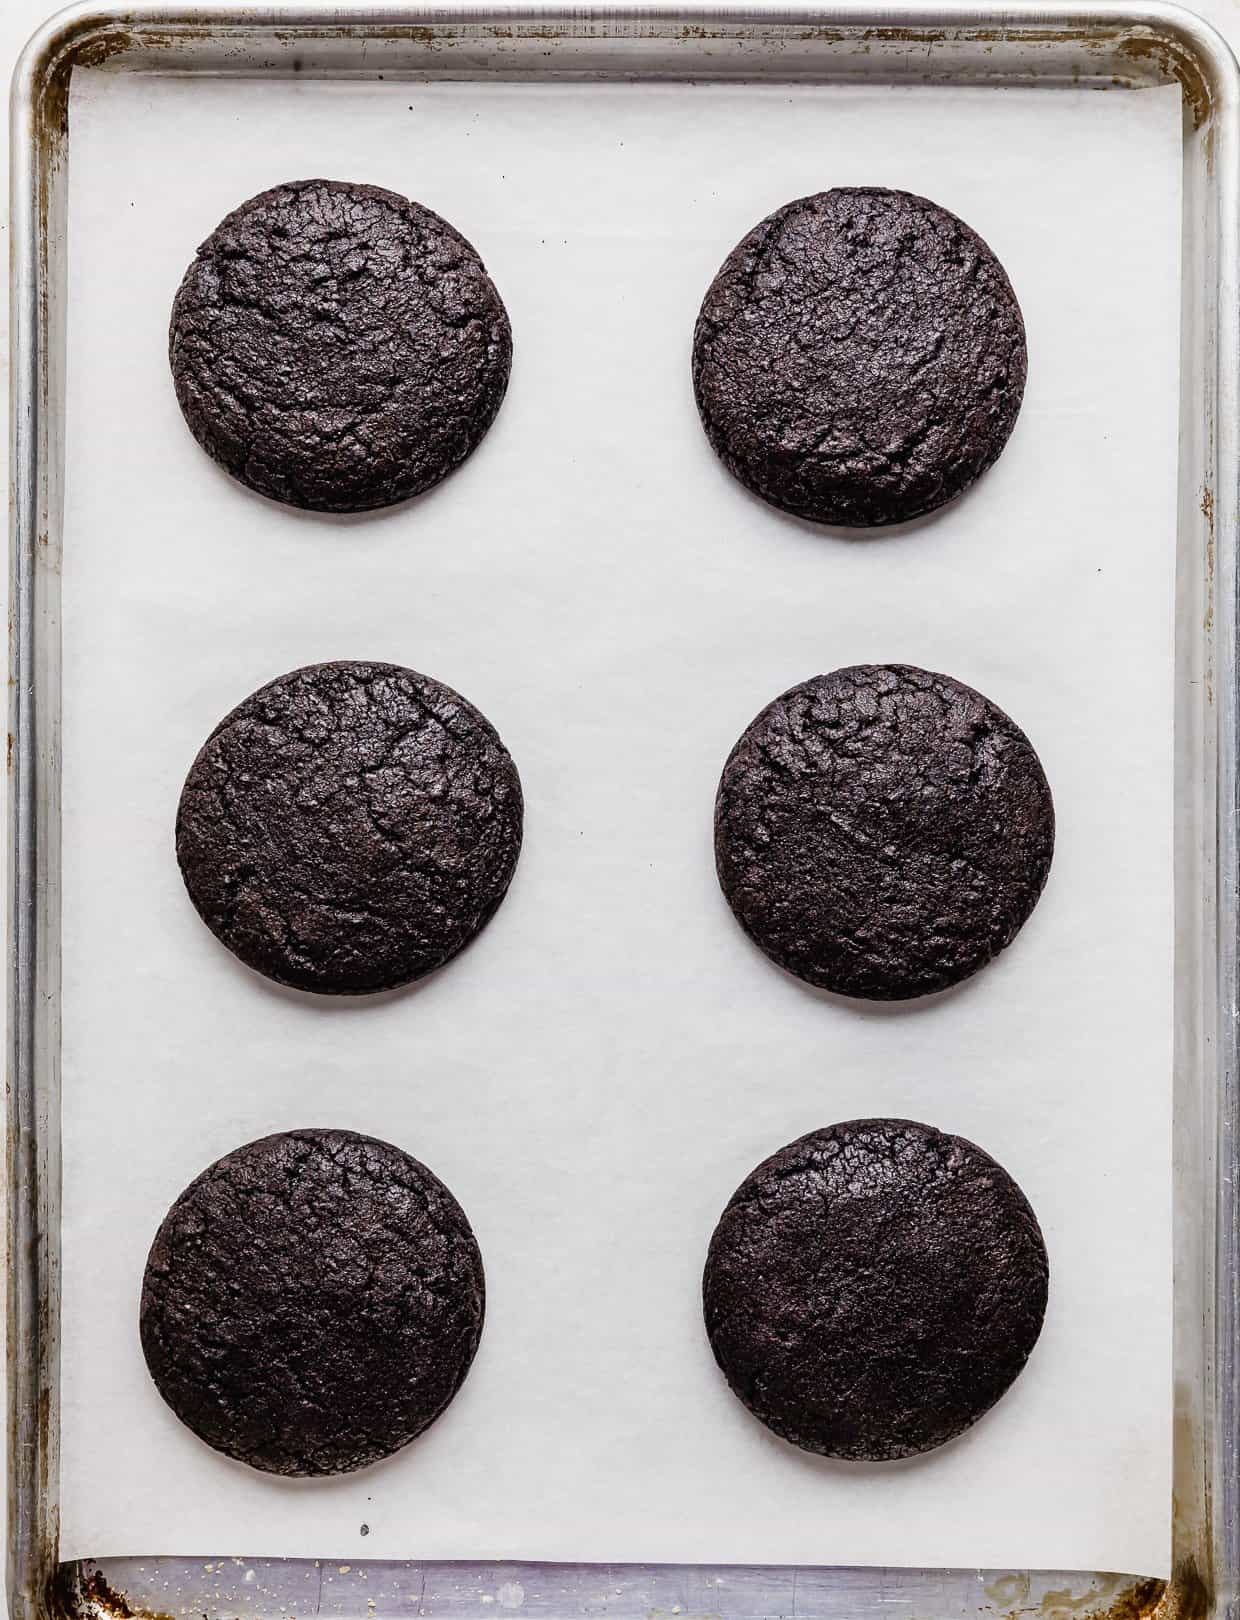 Six baked Crumbl sized Oreo Birthday Cake Cookies on a white parchment lined baking sheet.